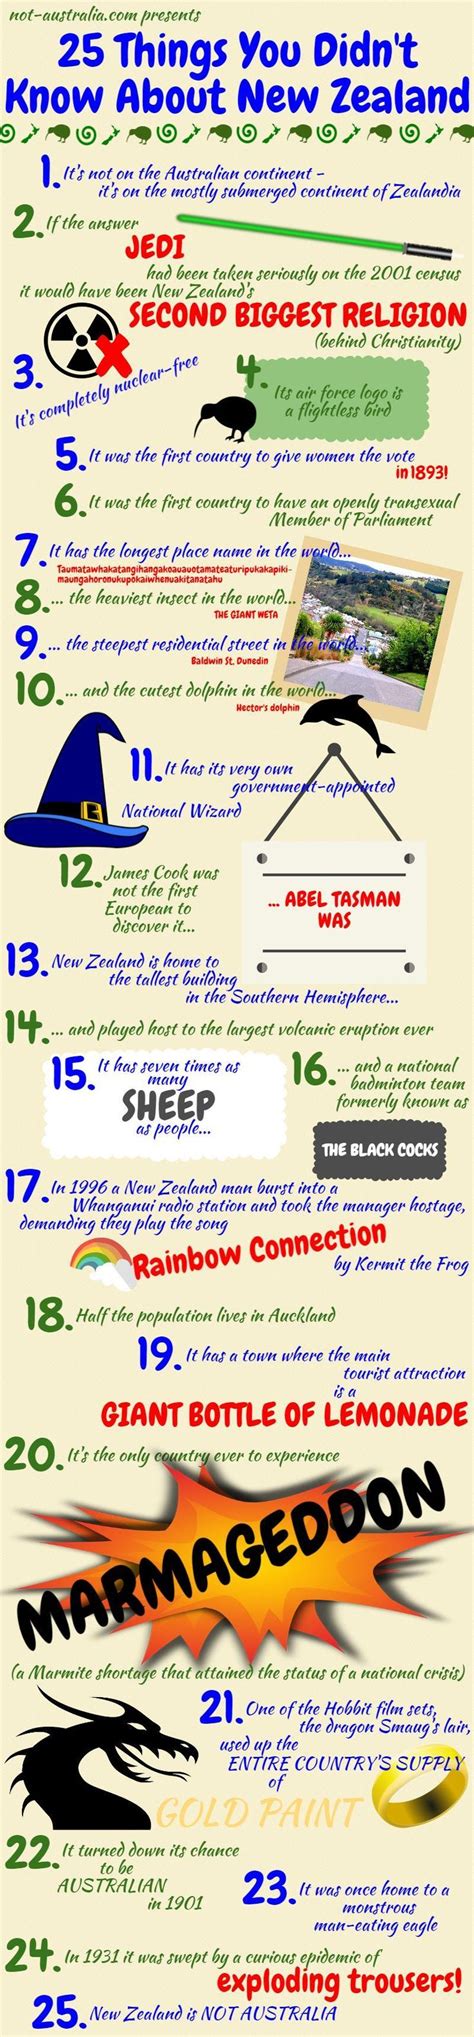 25 Things You Didnt Know About New Zealand By Not Nz